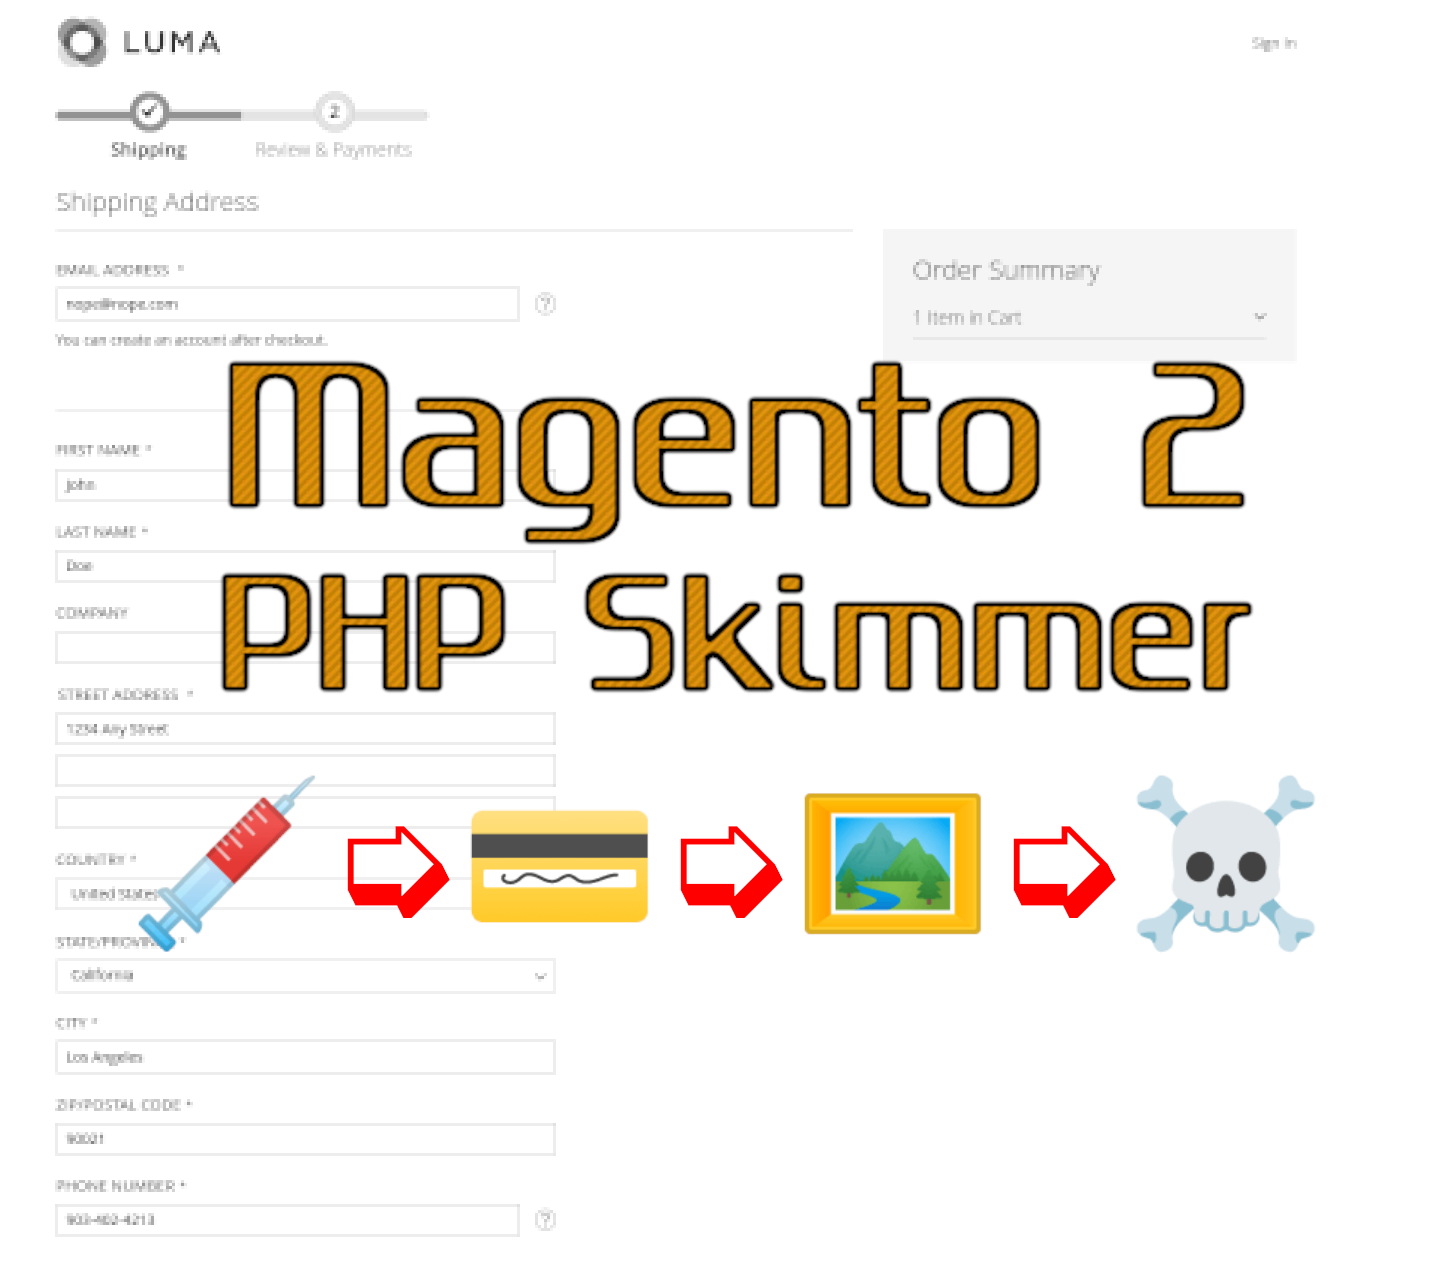 Magento 2 PHP Skimmer 0x3C Captures Customer Data To Image File